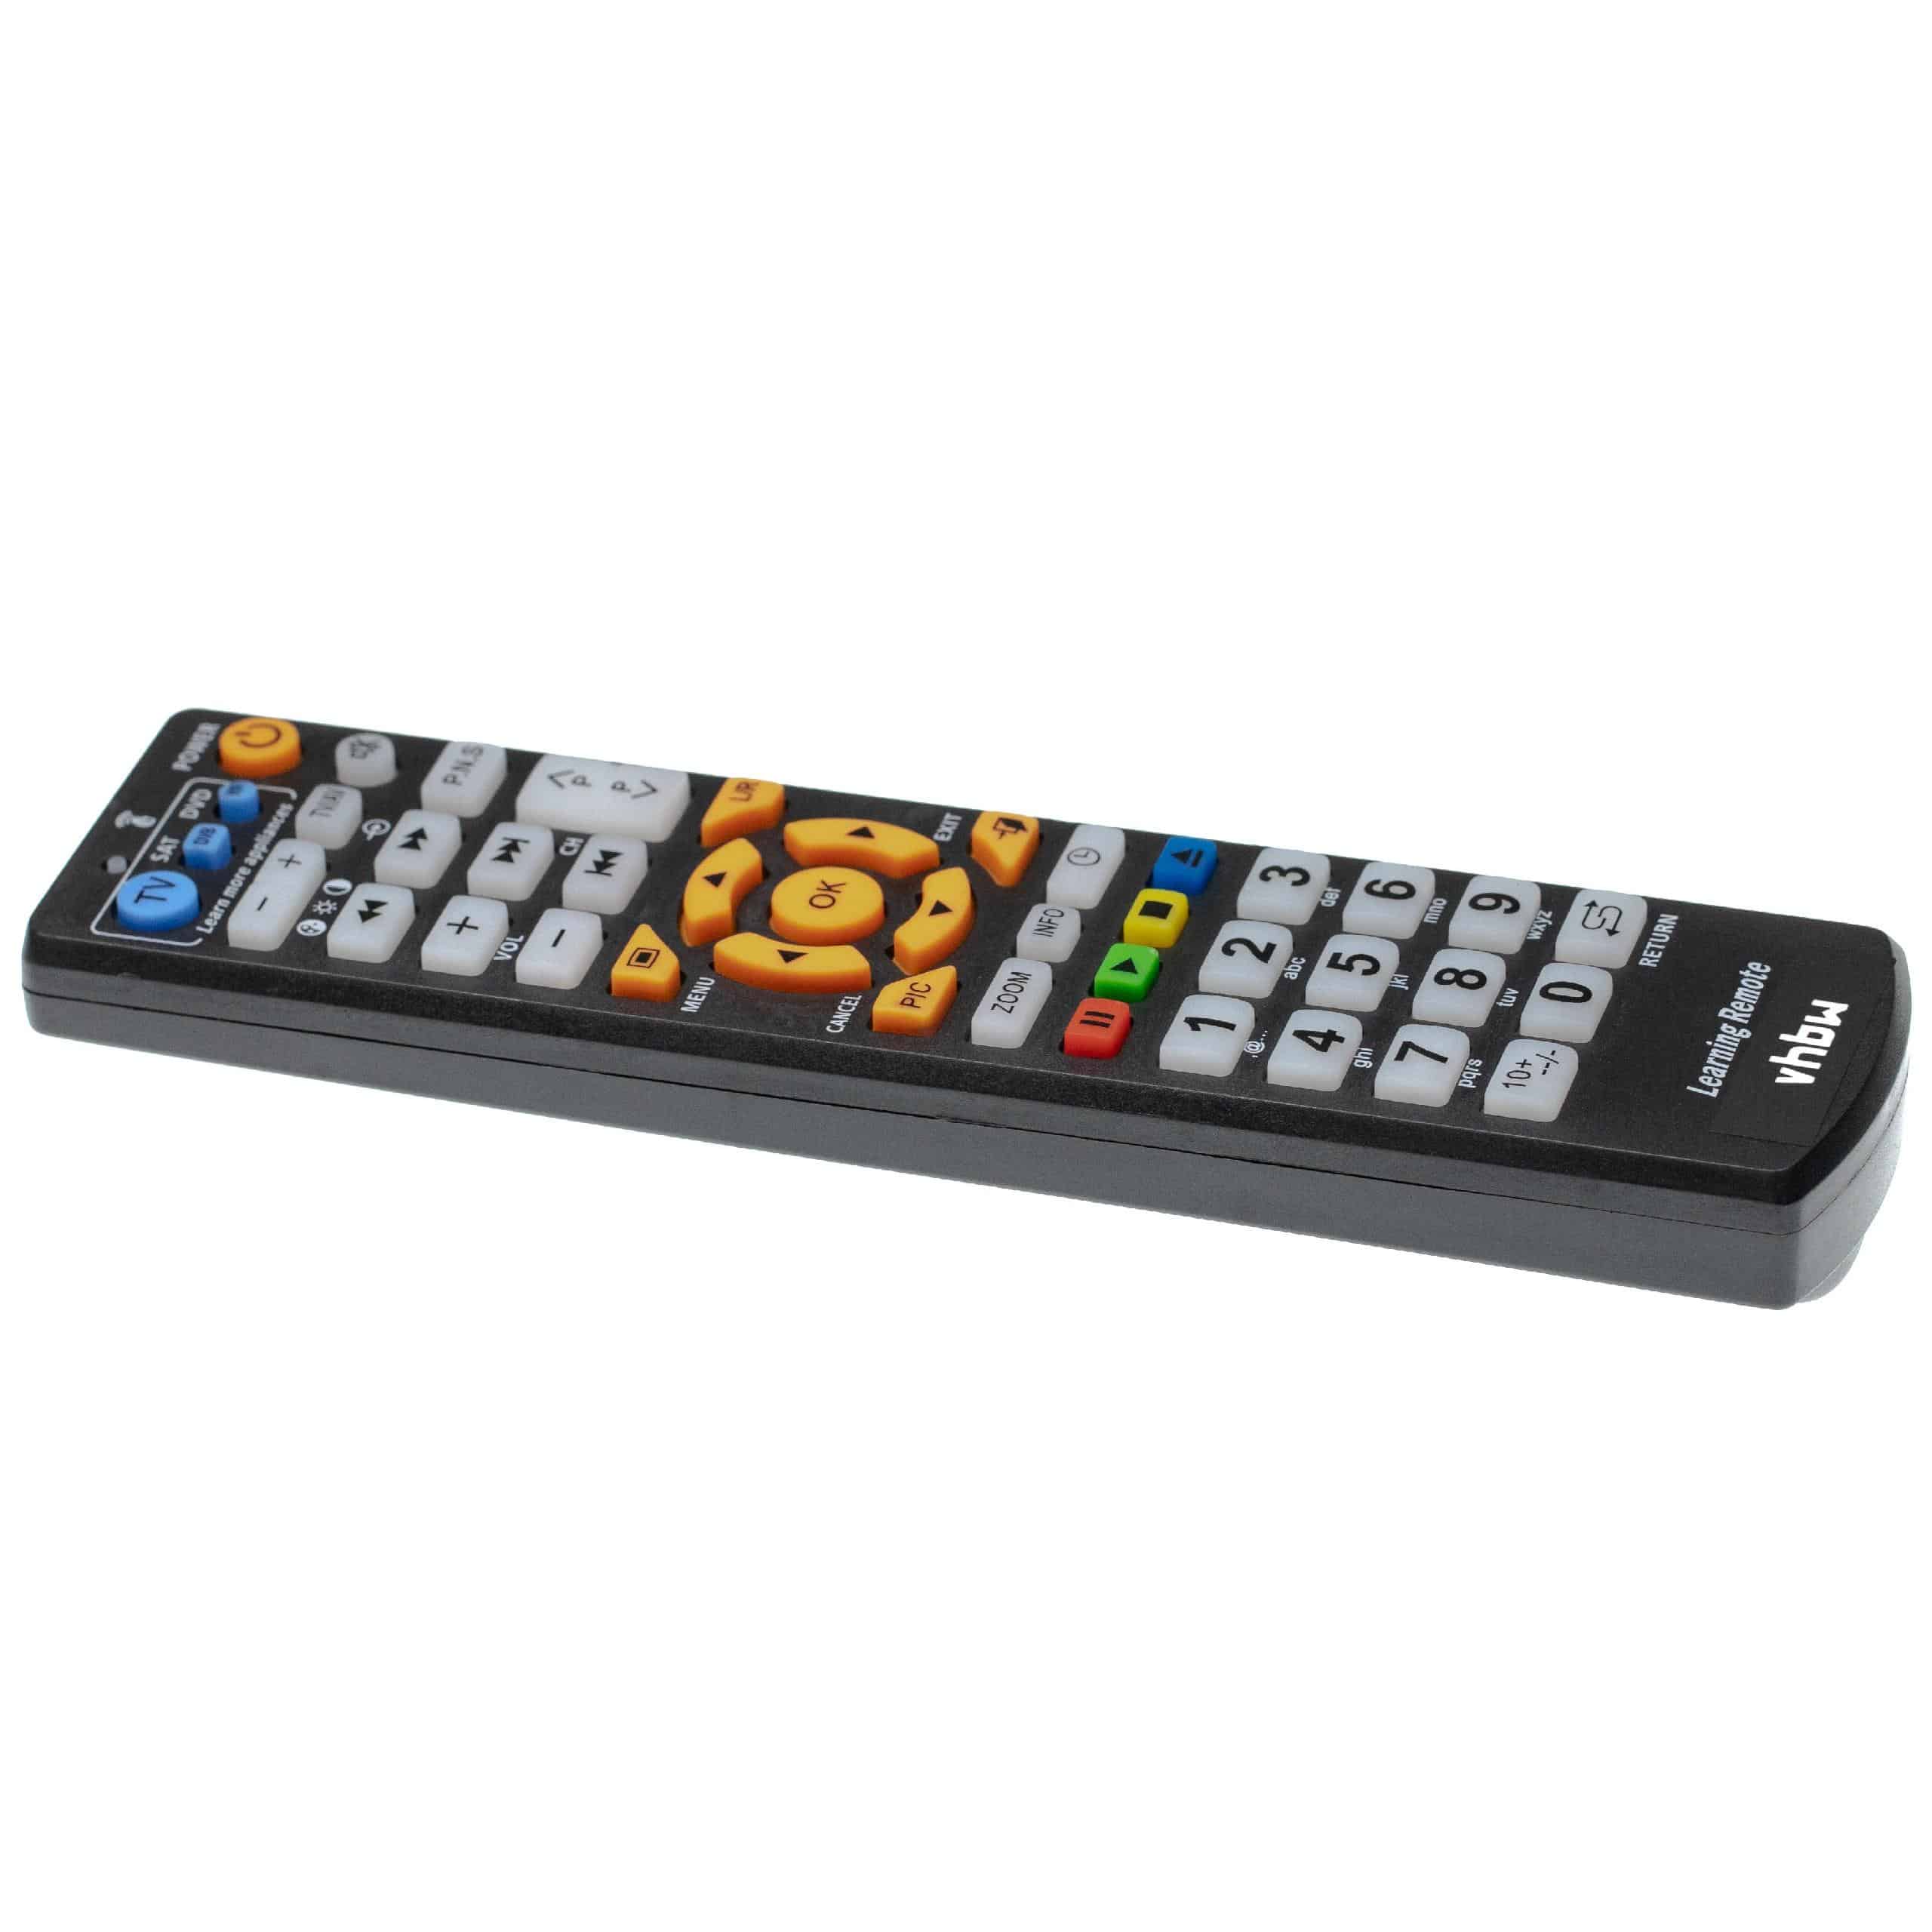  multi-function remote control replaces Type L336 for TV